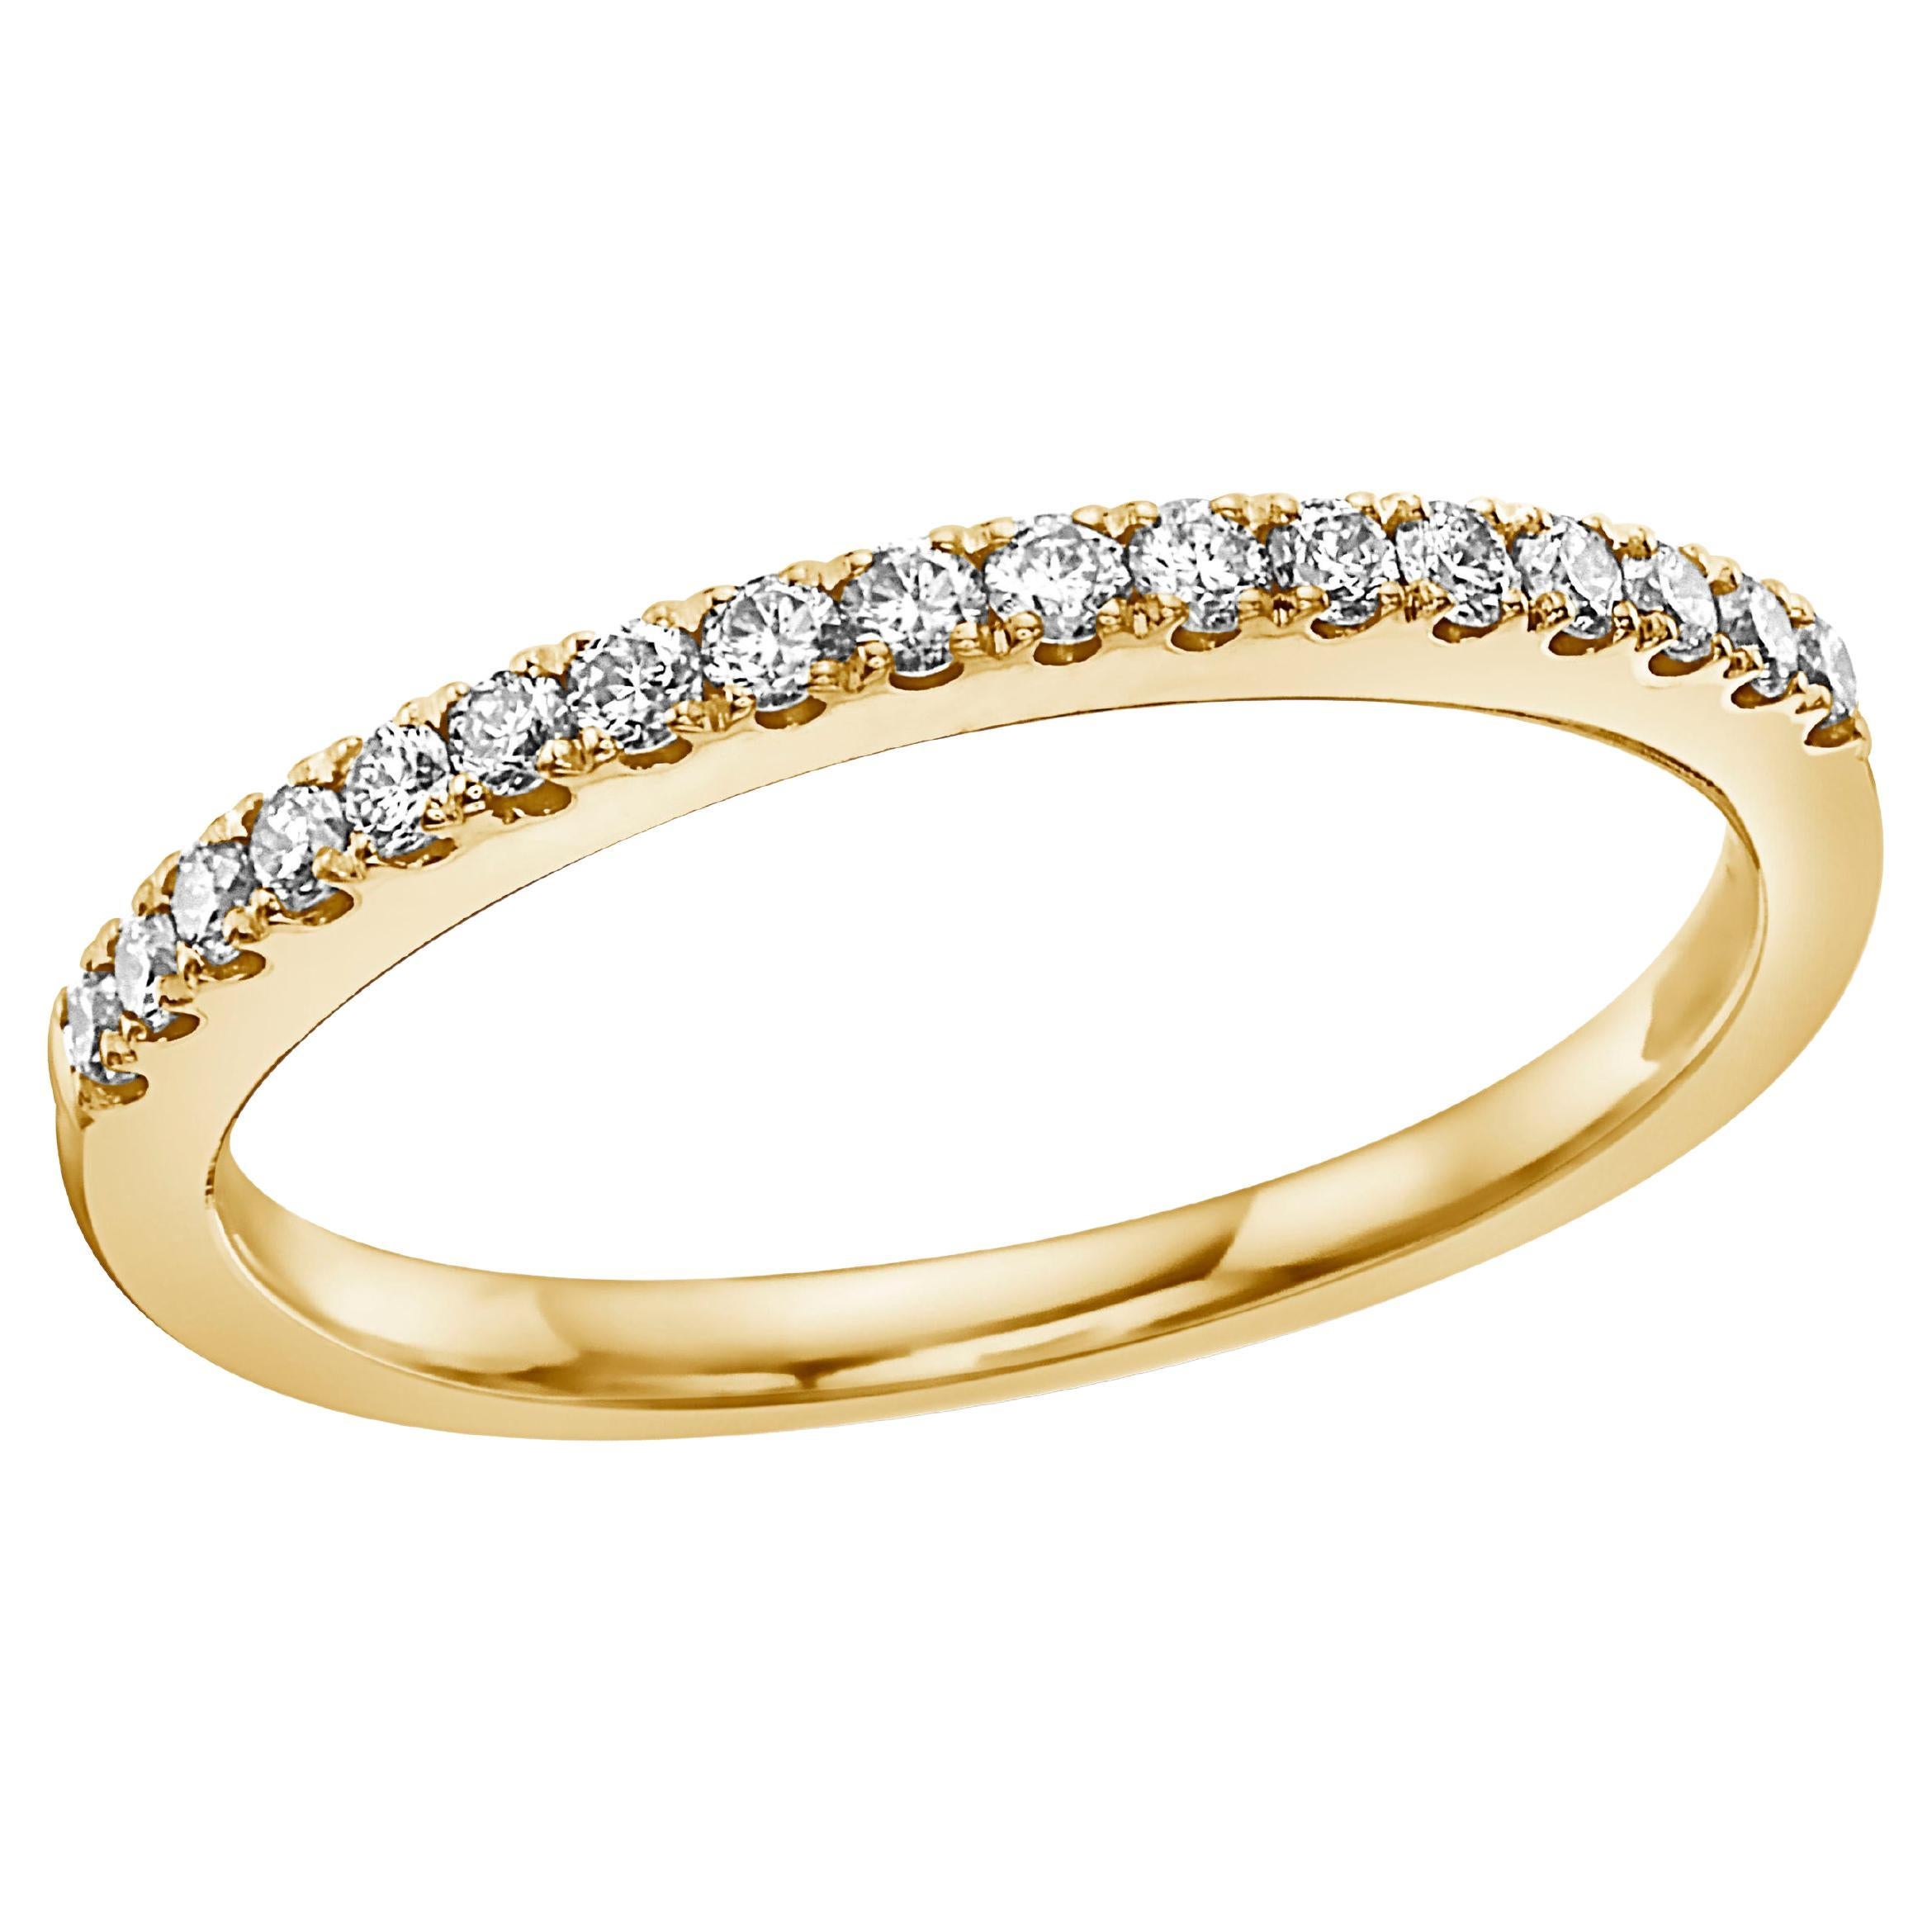 LeVian Creme Brulee Band Ring 1/4 Cts Nude Diamonds Set in 14k Yellow Gold